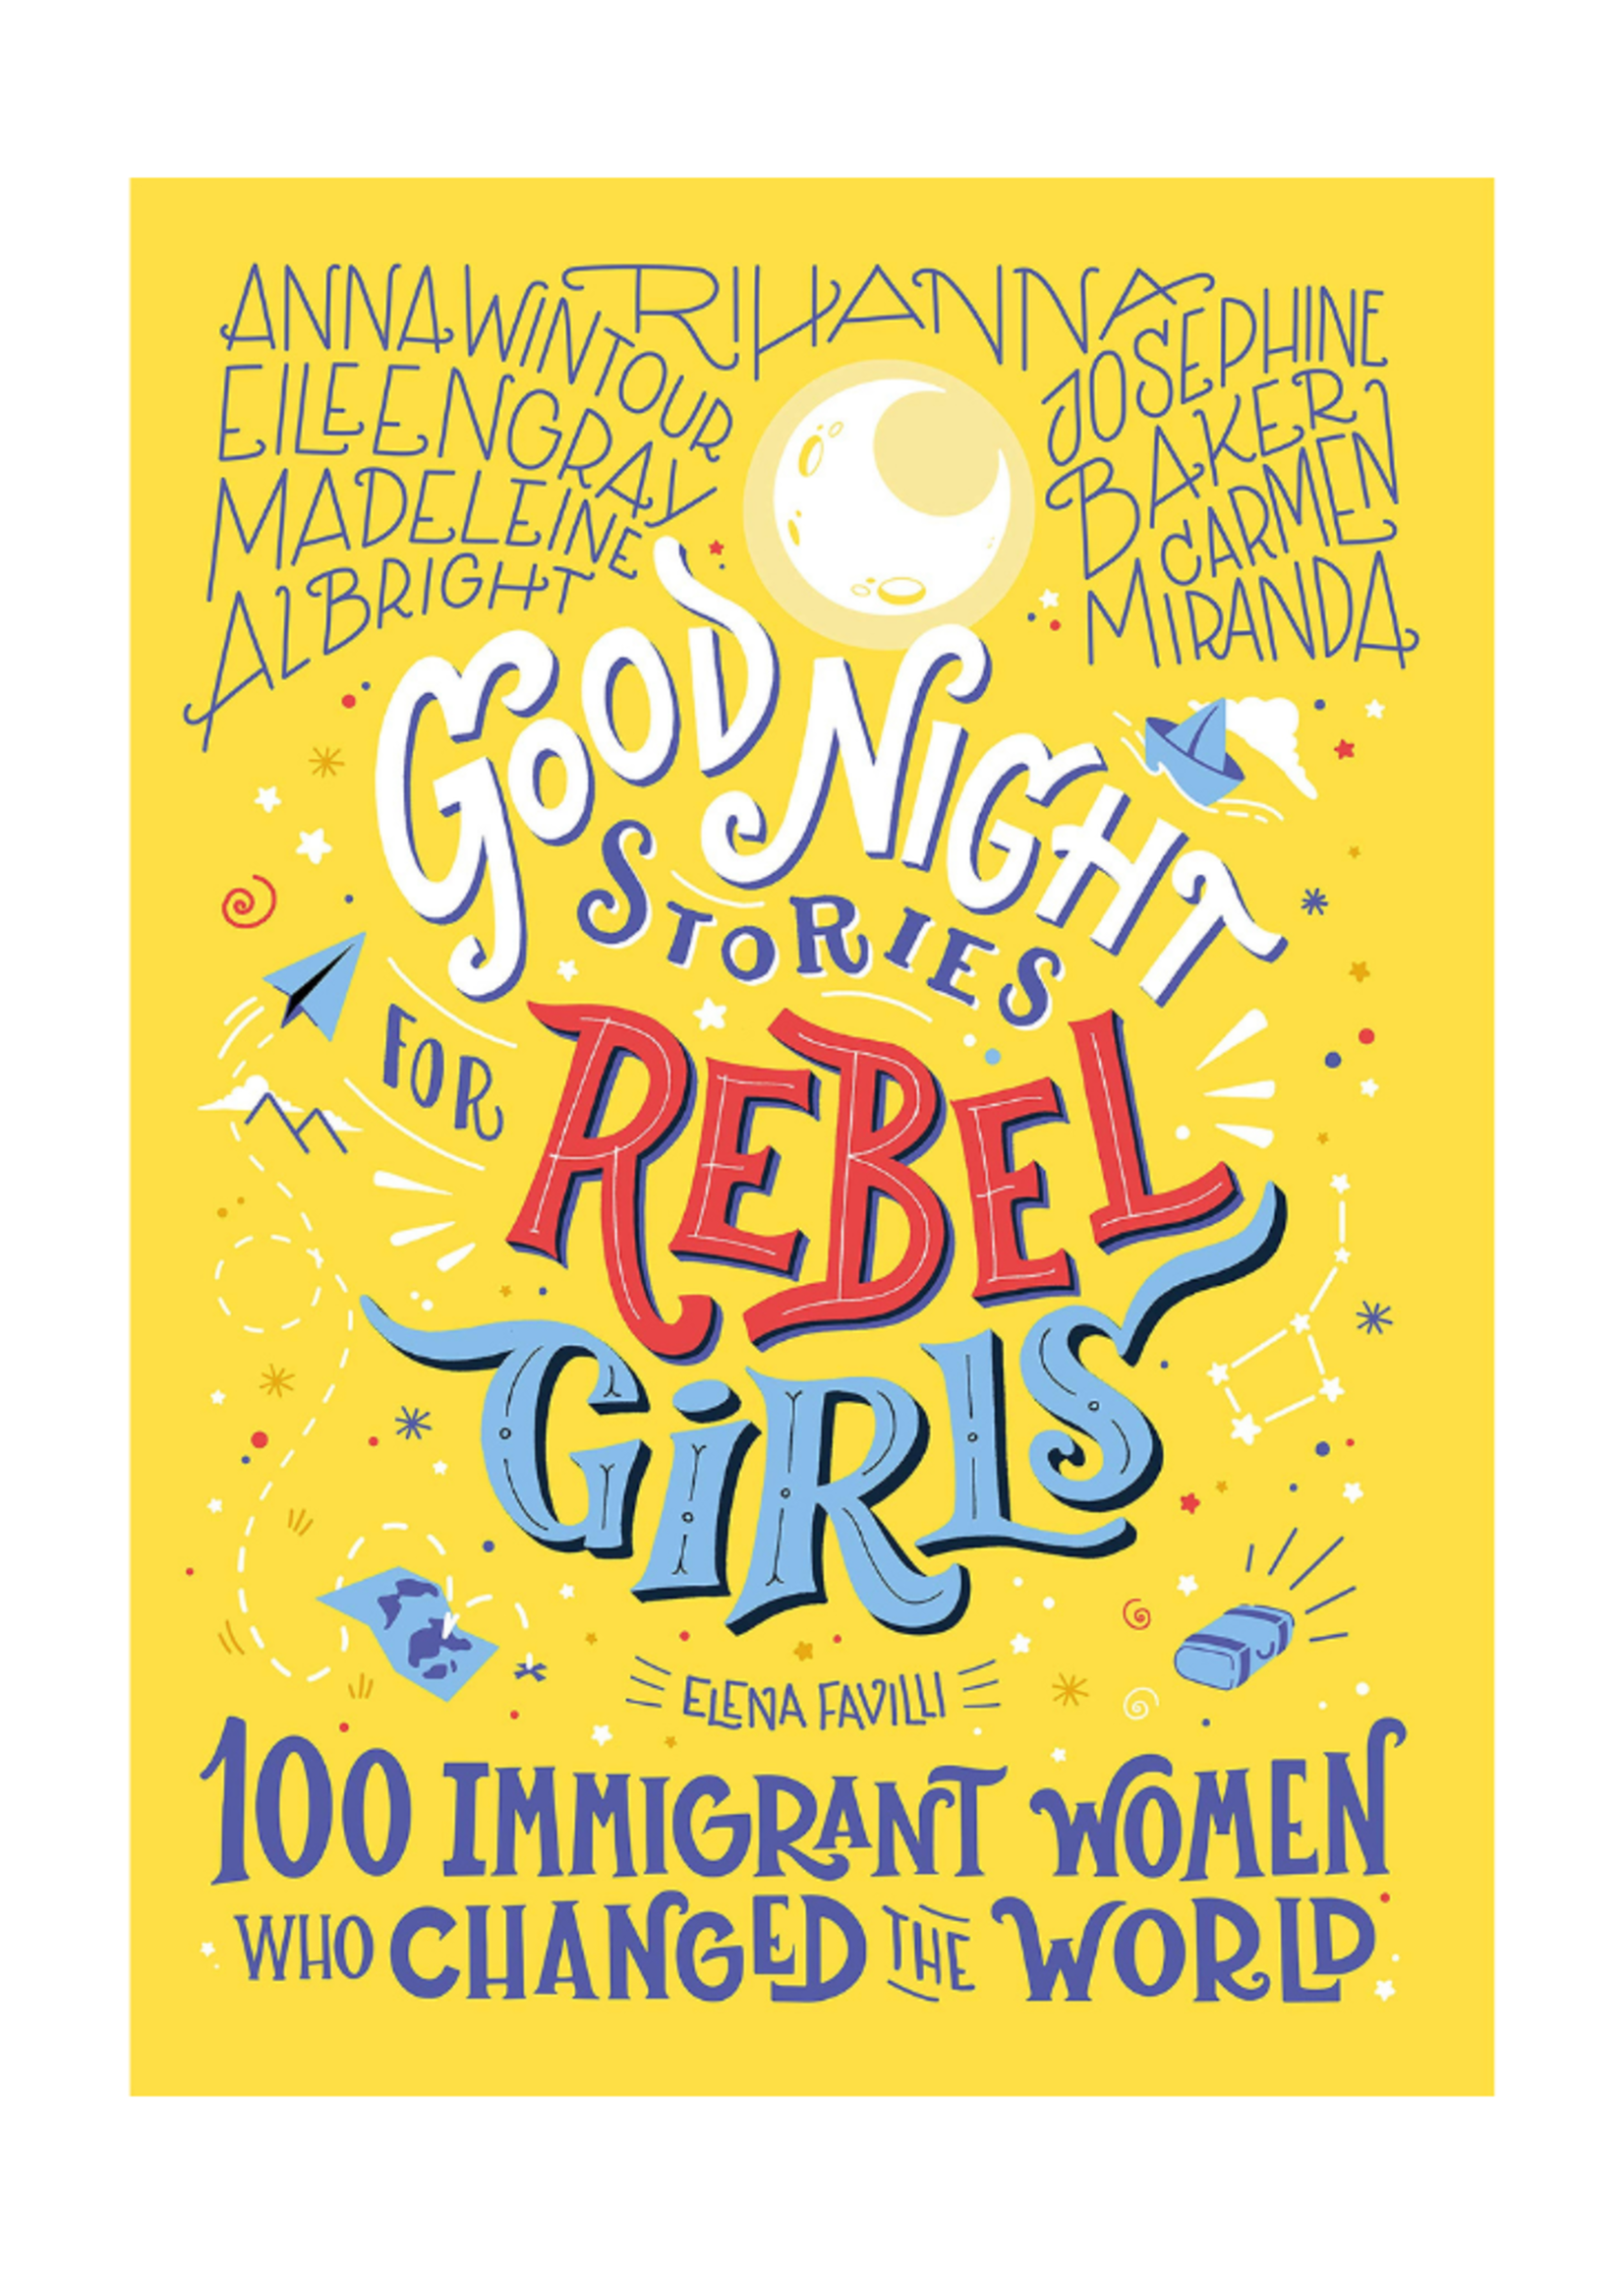 Rebel Girls Good Night Stories for Rebel Girls: 100 Immigrant Women Who Changed the World by Elena Favilli